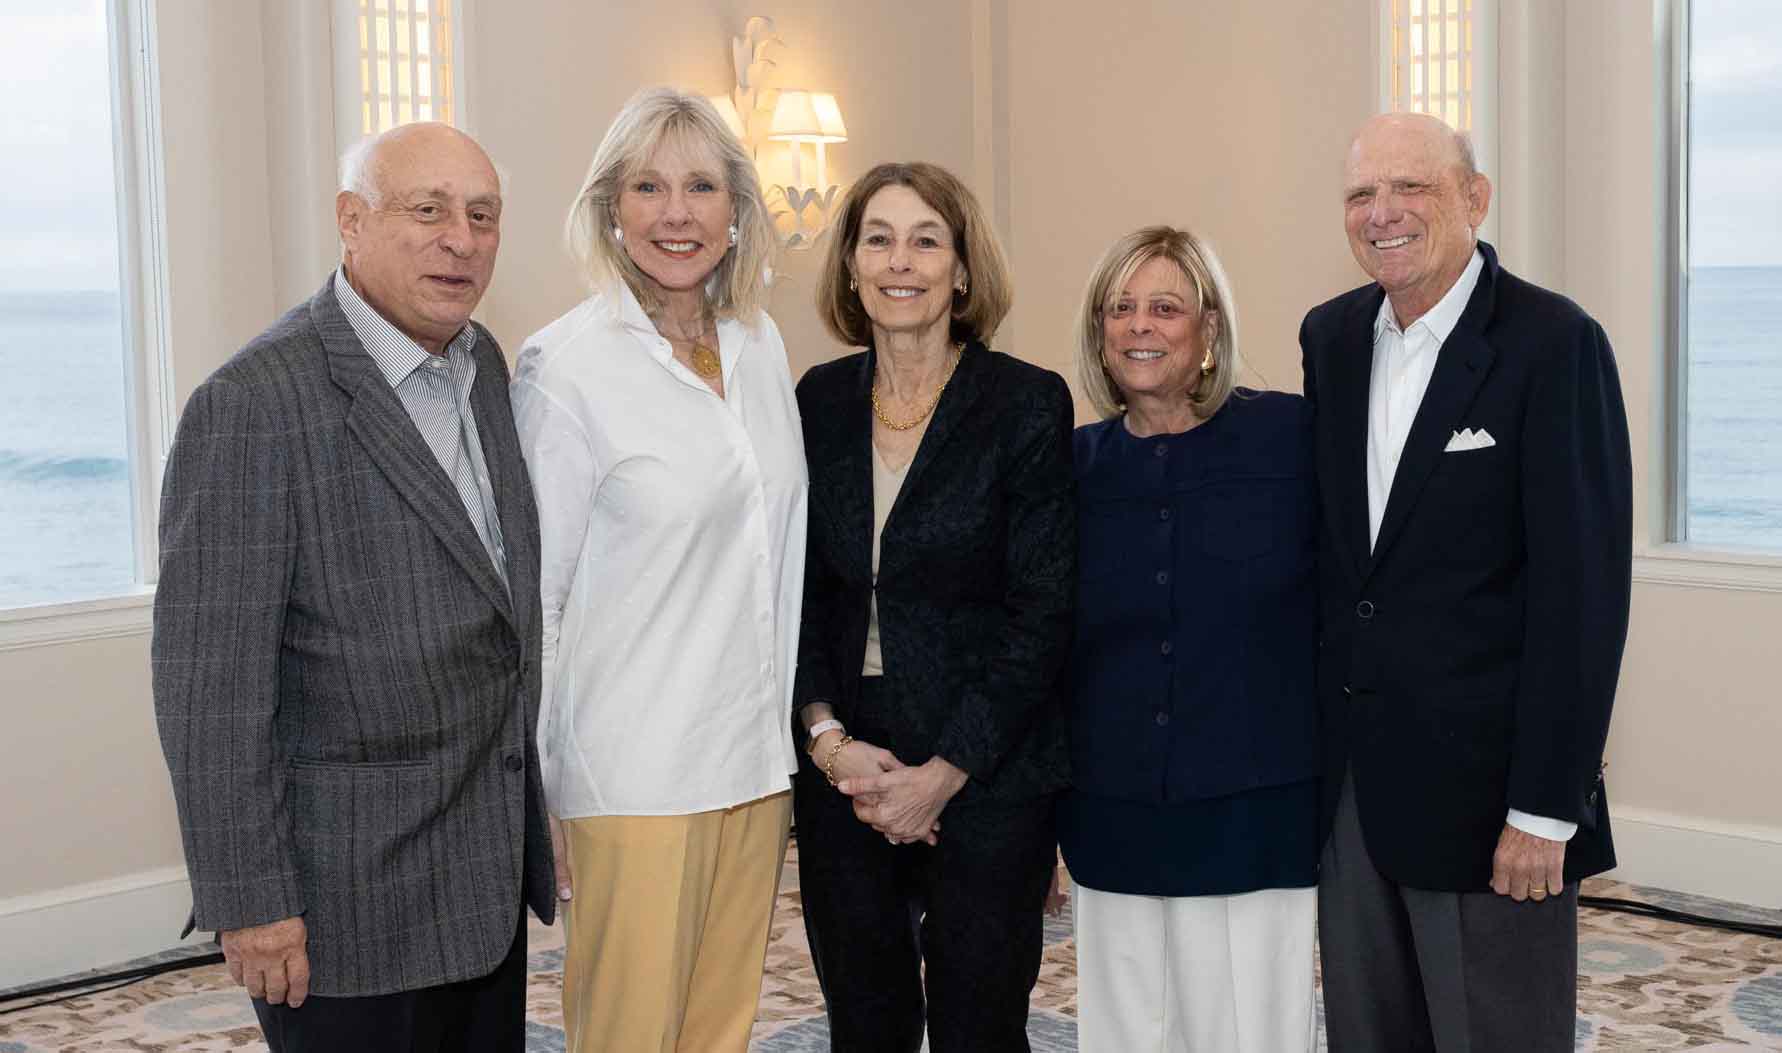 l to r - Judy and Jim Harpel, Dr. Laurie Glimcher, and Vicki and Arthur Loring